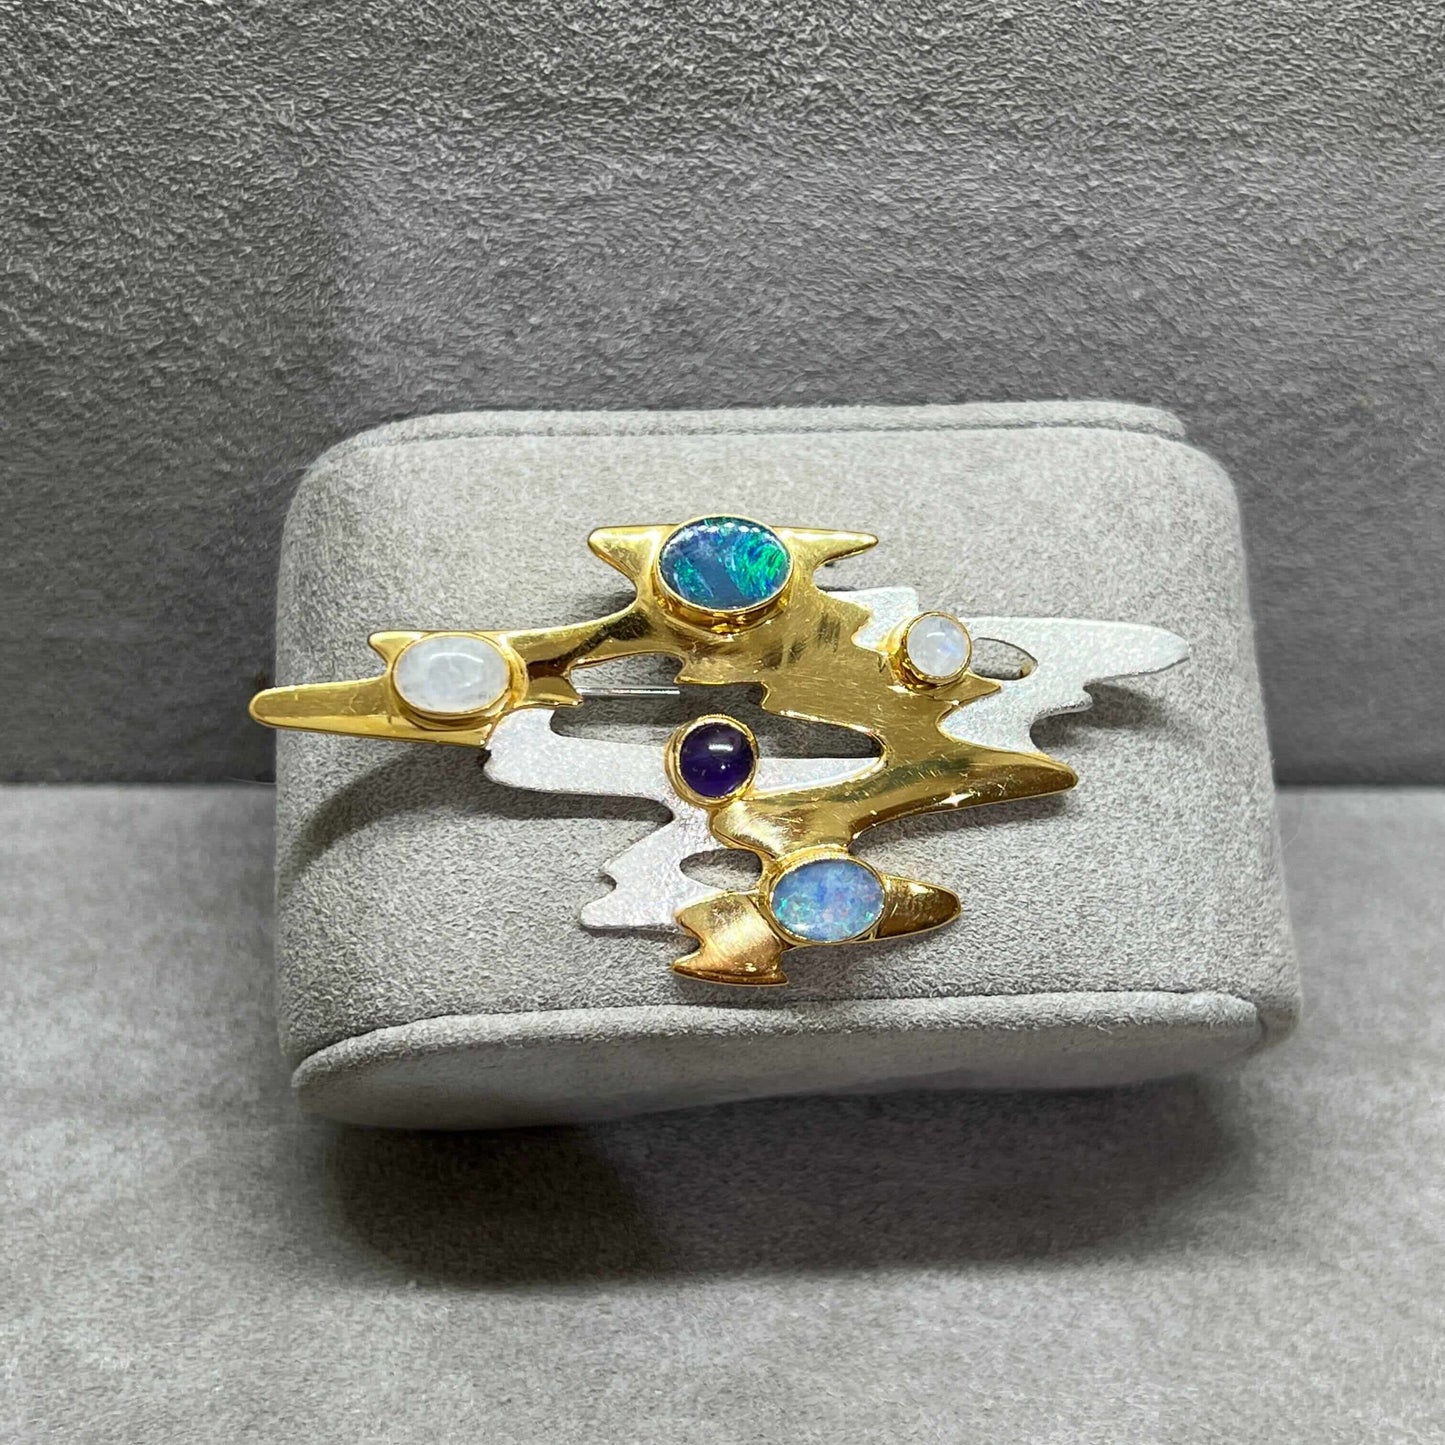 Monet Reflections Brooch - Sterling Silver with Opals, Moonstone & Iolite - Twelve Silver Trees